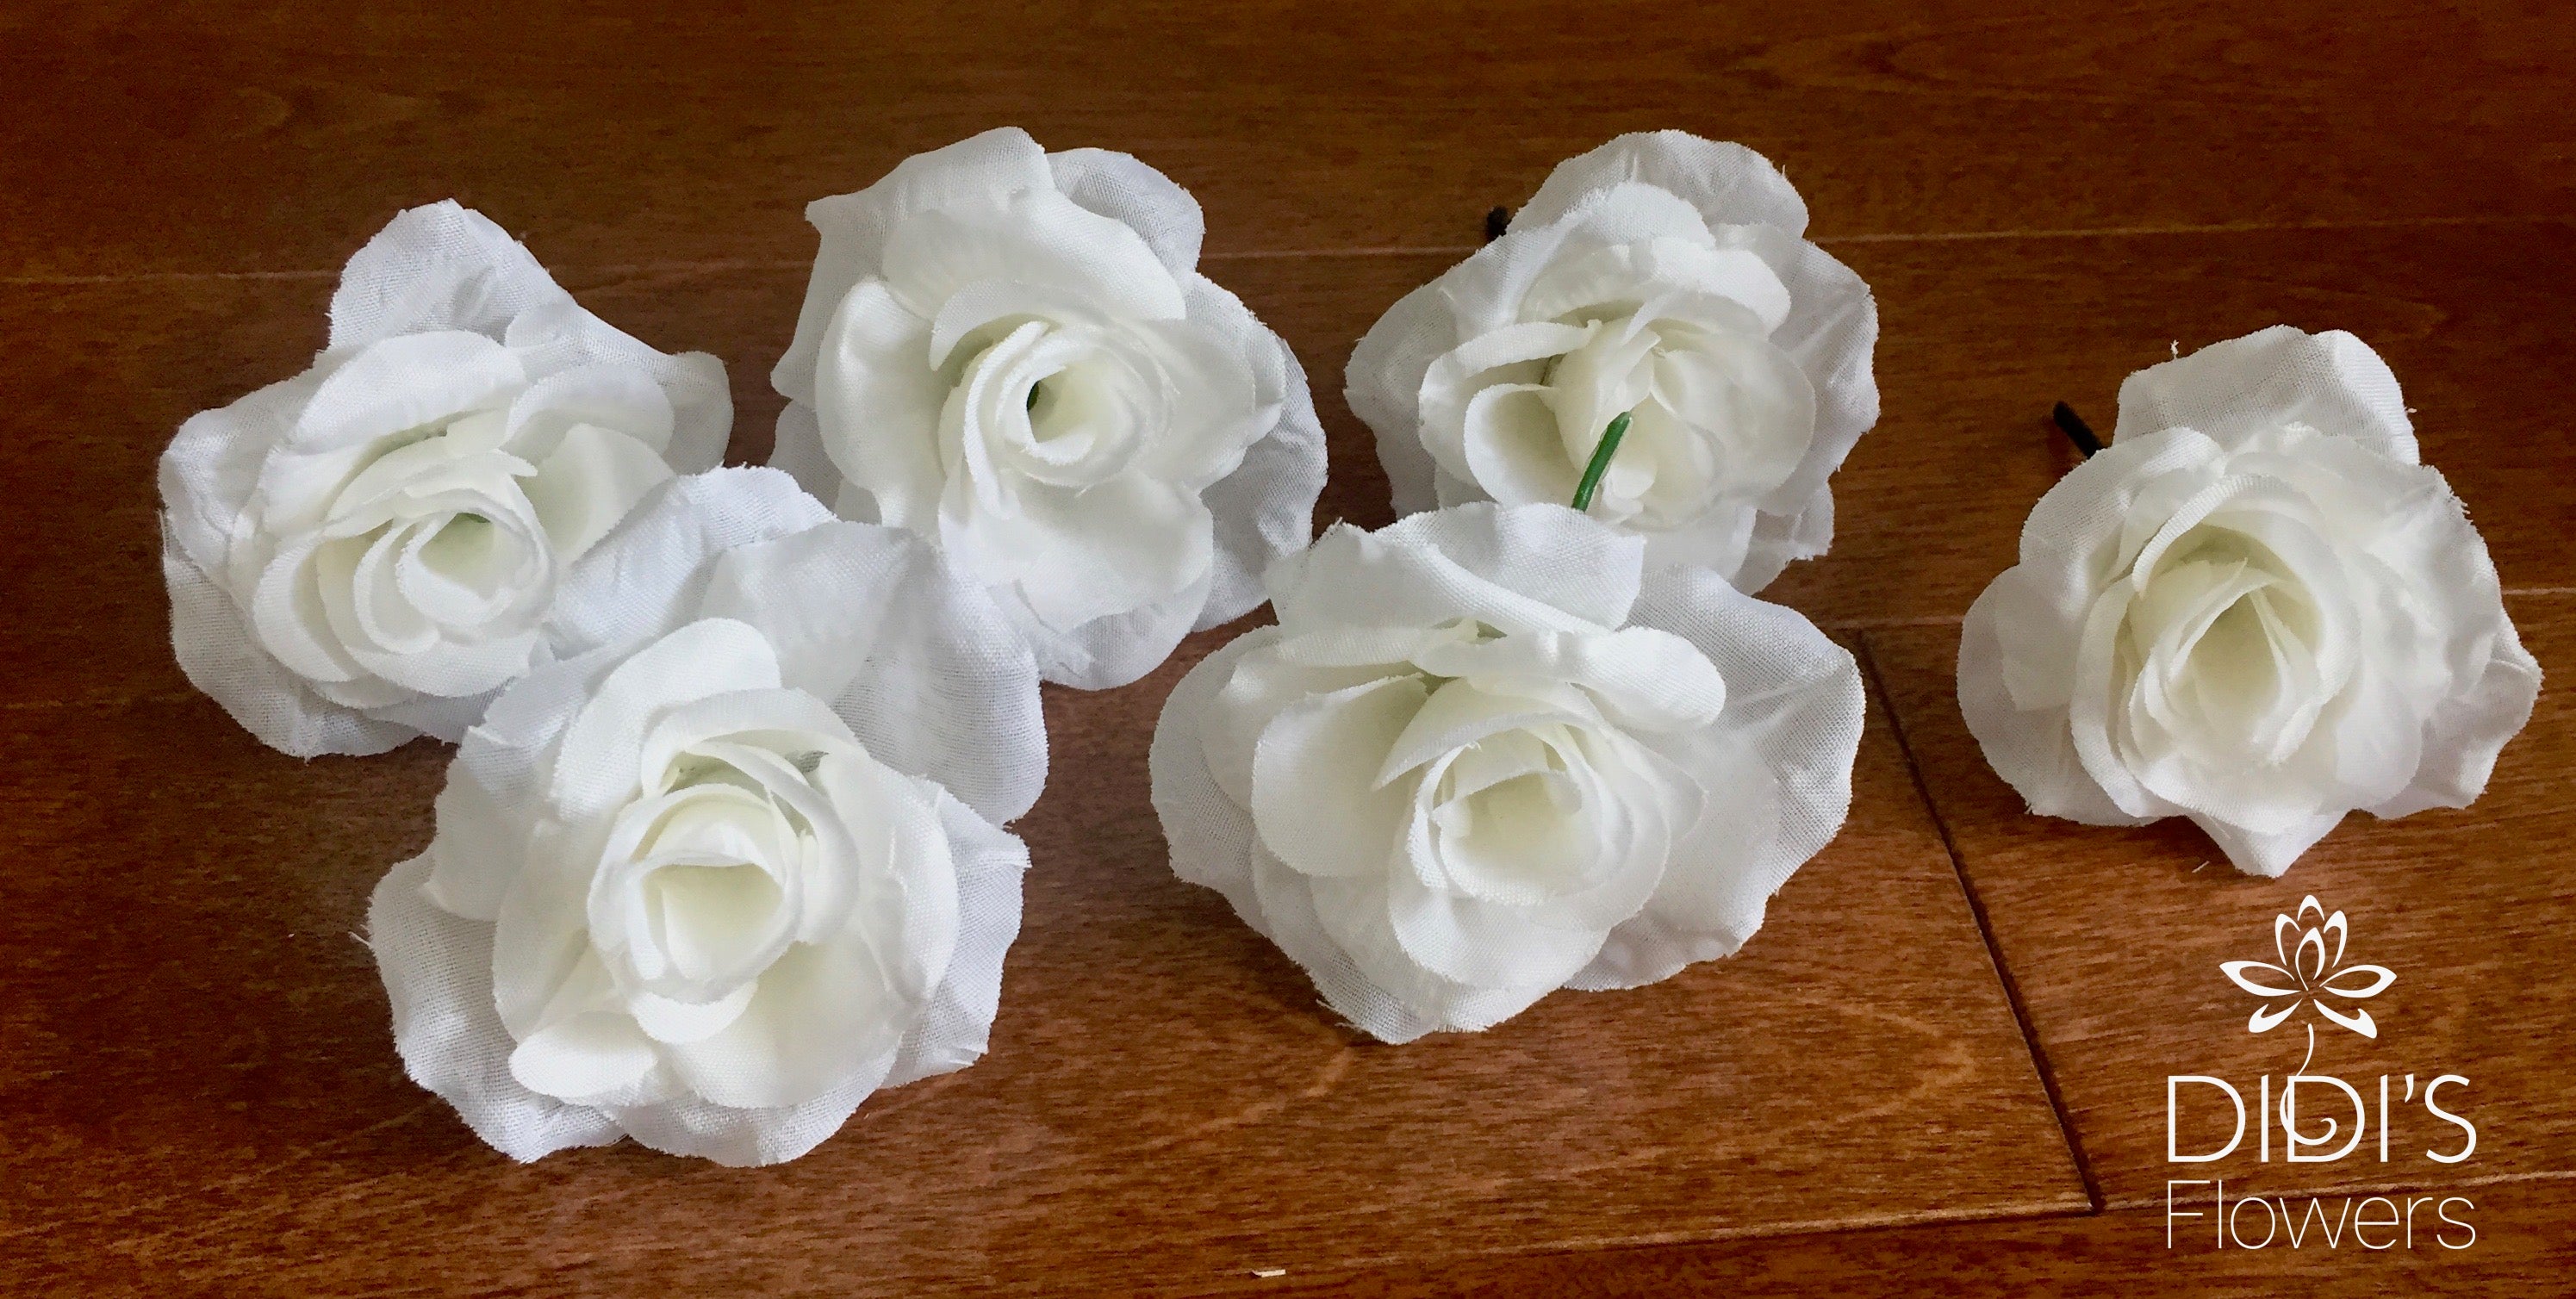 Hairpiece Roses - Individual Blooms (Box of 6)